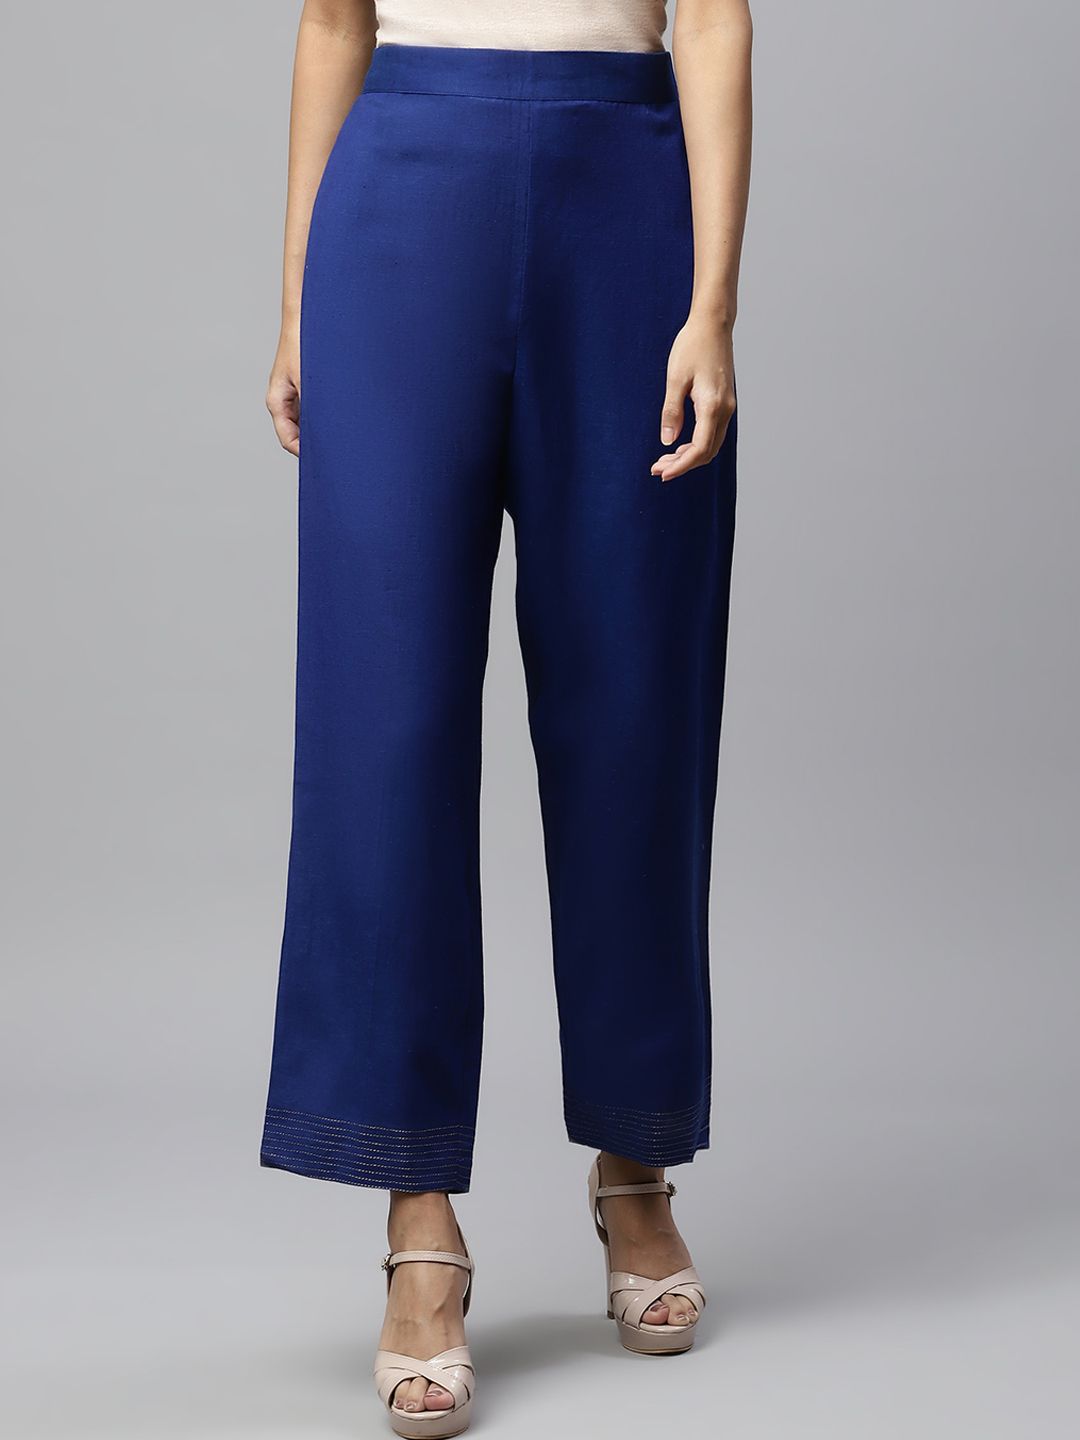 Linen Club Woman Women Navy Blue Solid Linen Culottes Trousers Price in India